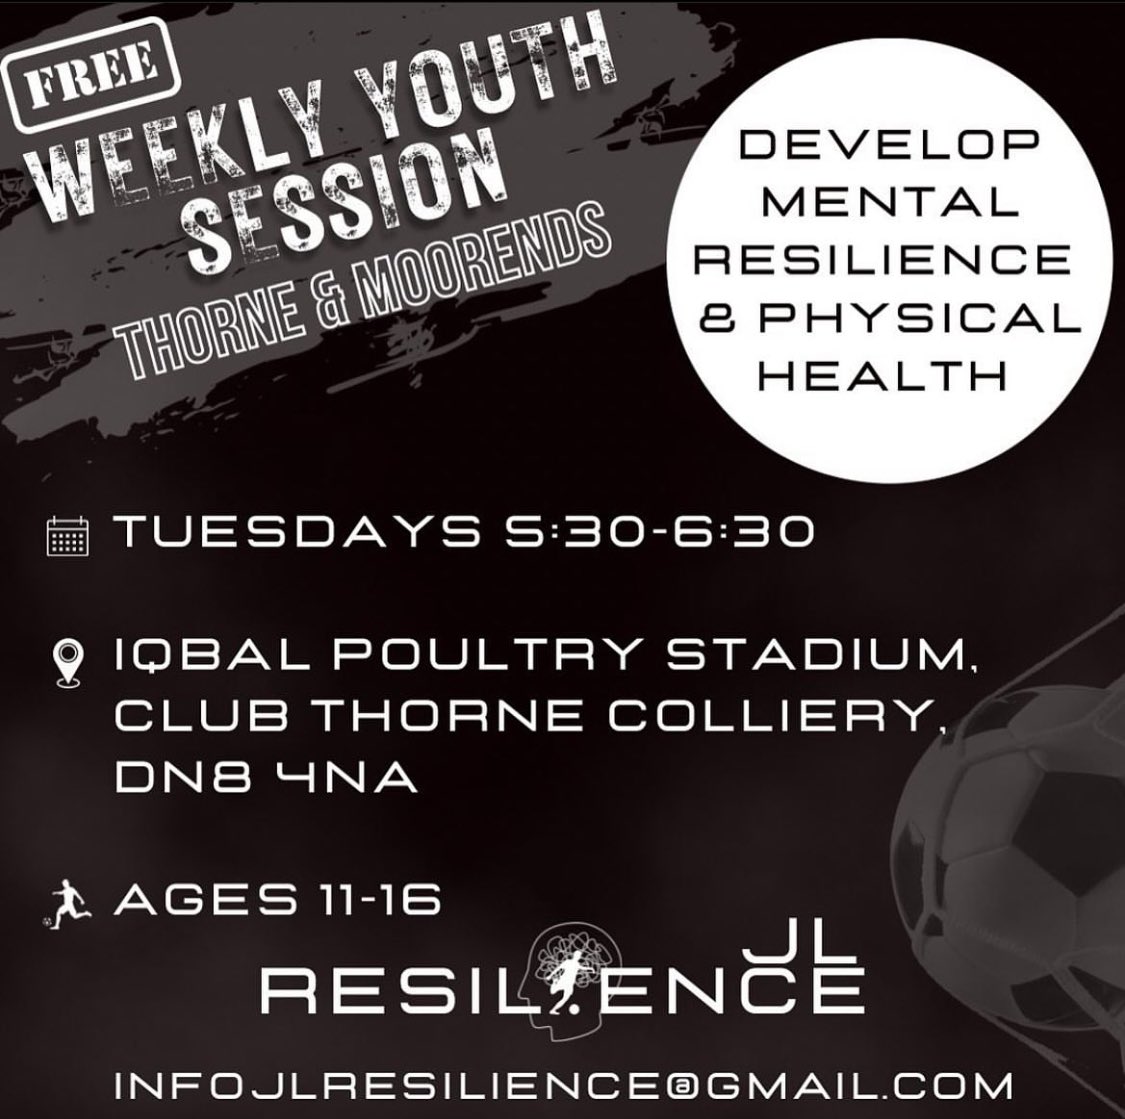 Tonight! HEALTHY BODY HEALTHY MIND PROJECT⚽️ 📆 Tuesday’s ⏰ 5:30-6:30pm 📍 Iqbal Poultry Stadium, Grange Road, DN8 4NH Ages 11-16 #JLresilience #healthybody #healthymind #mentalhealth #getactive #thorne #clubthorne #doncasterisgreat #doncaster